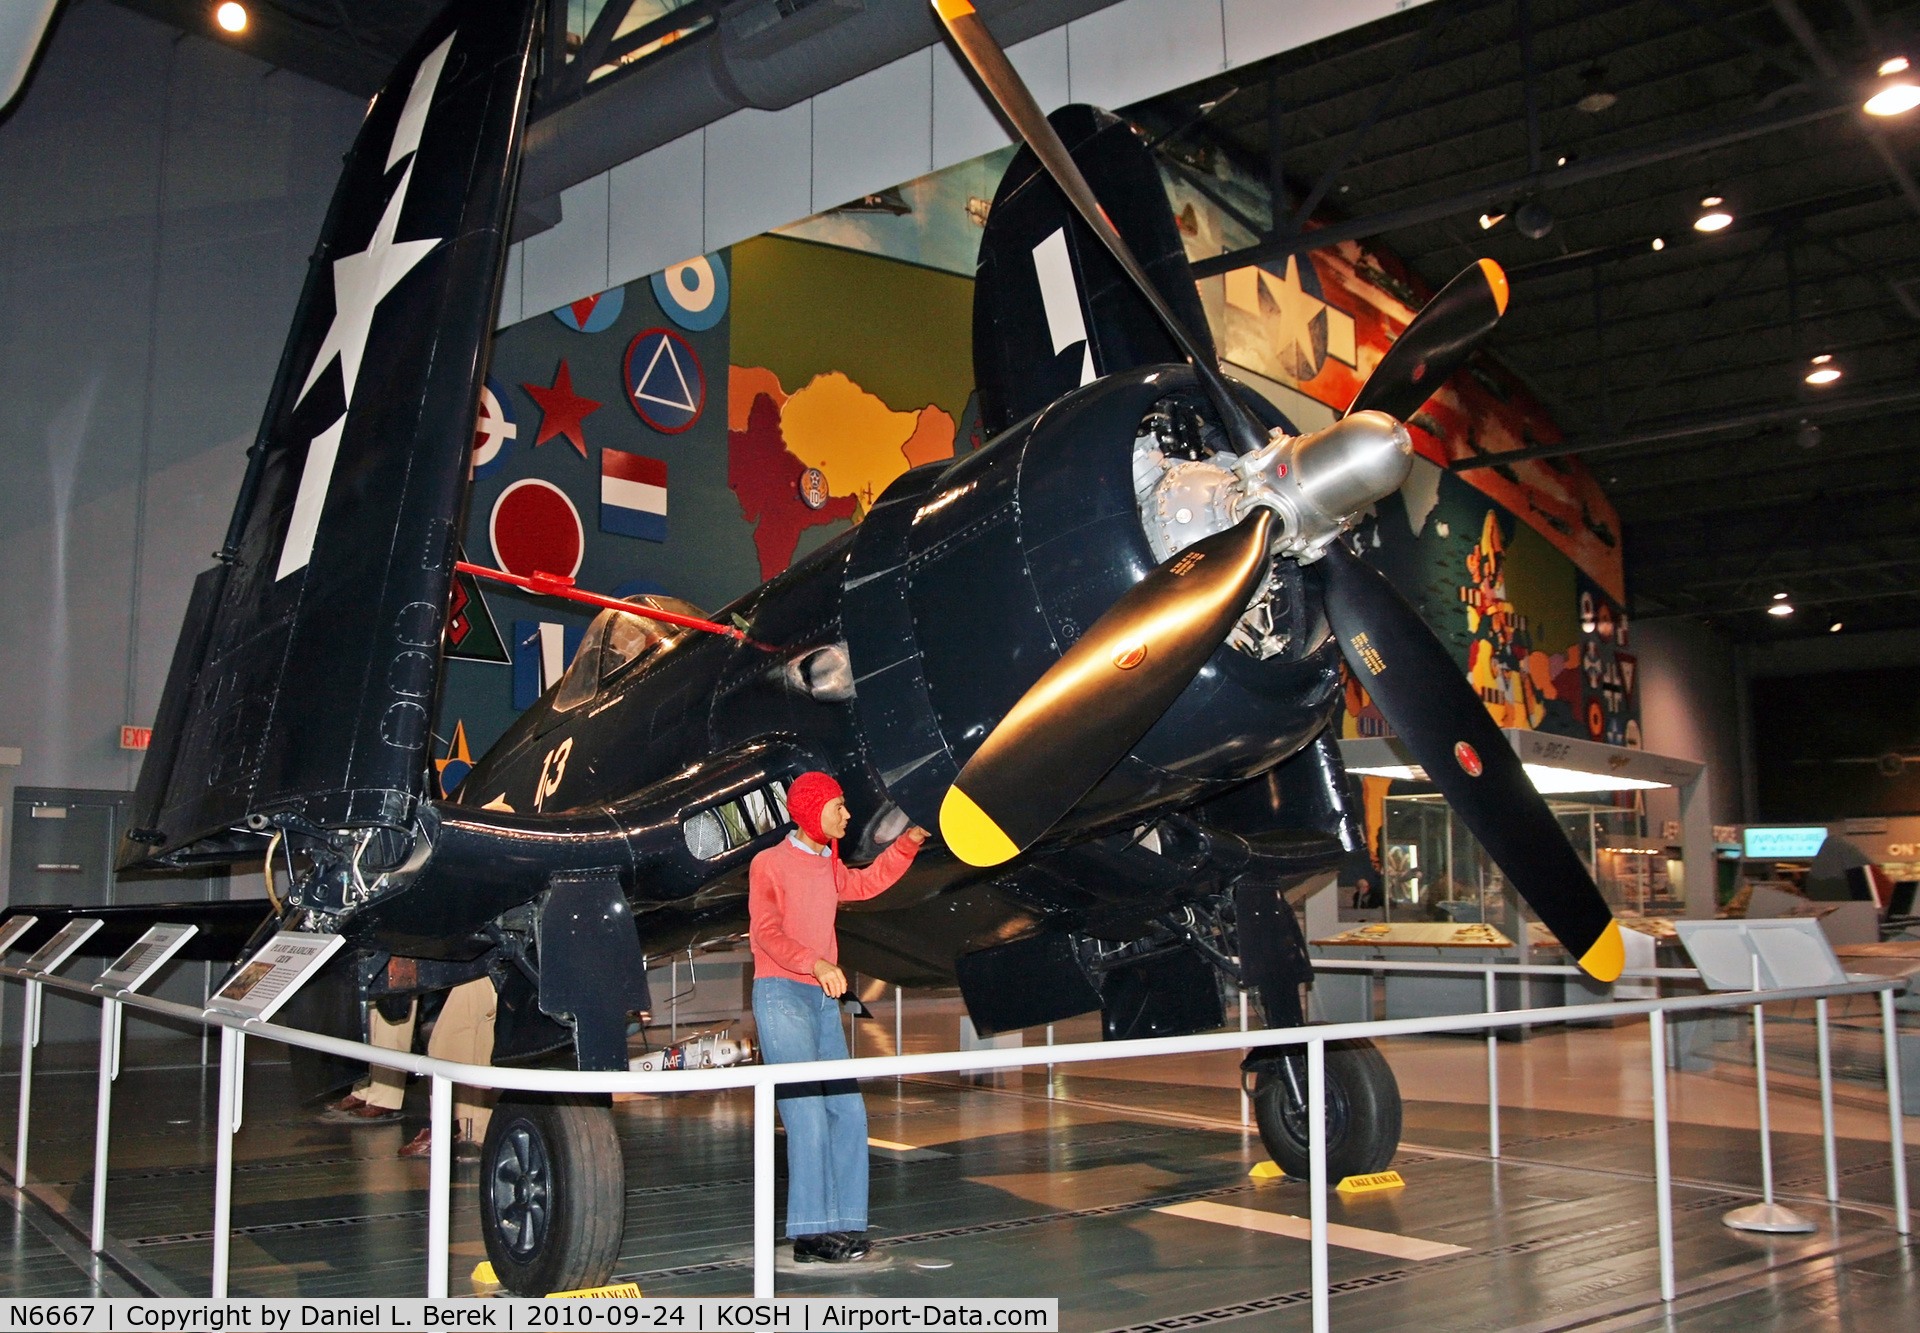 N6667, 1945 Vought F4U-4 Corsair C/N 9413, After its military career, the Corsair enjoyed many uses as a racer and aerobatic aircraft, owing to its extremely powerful engine.